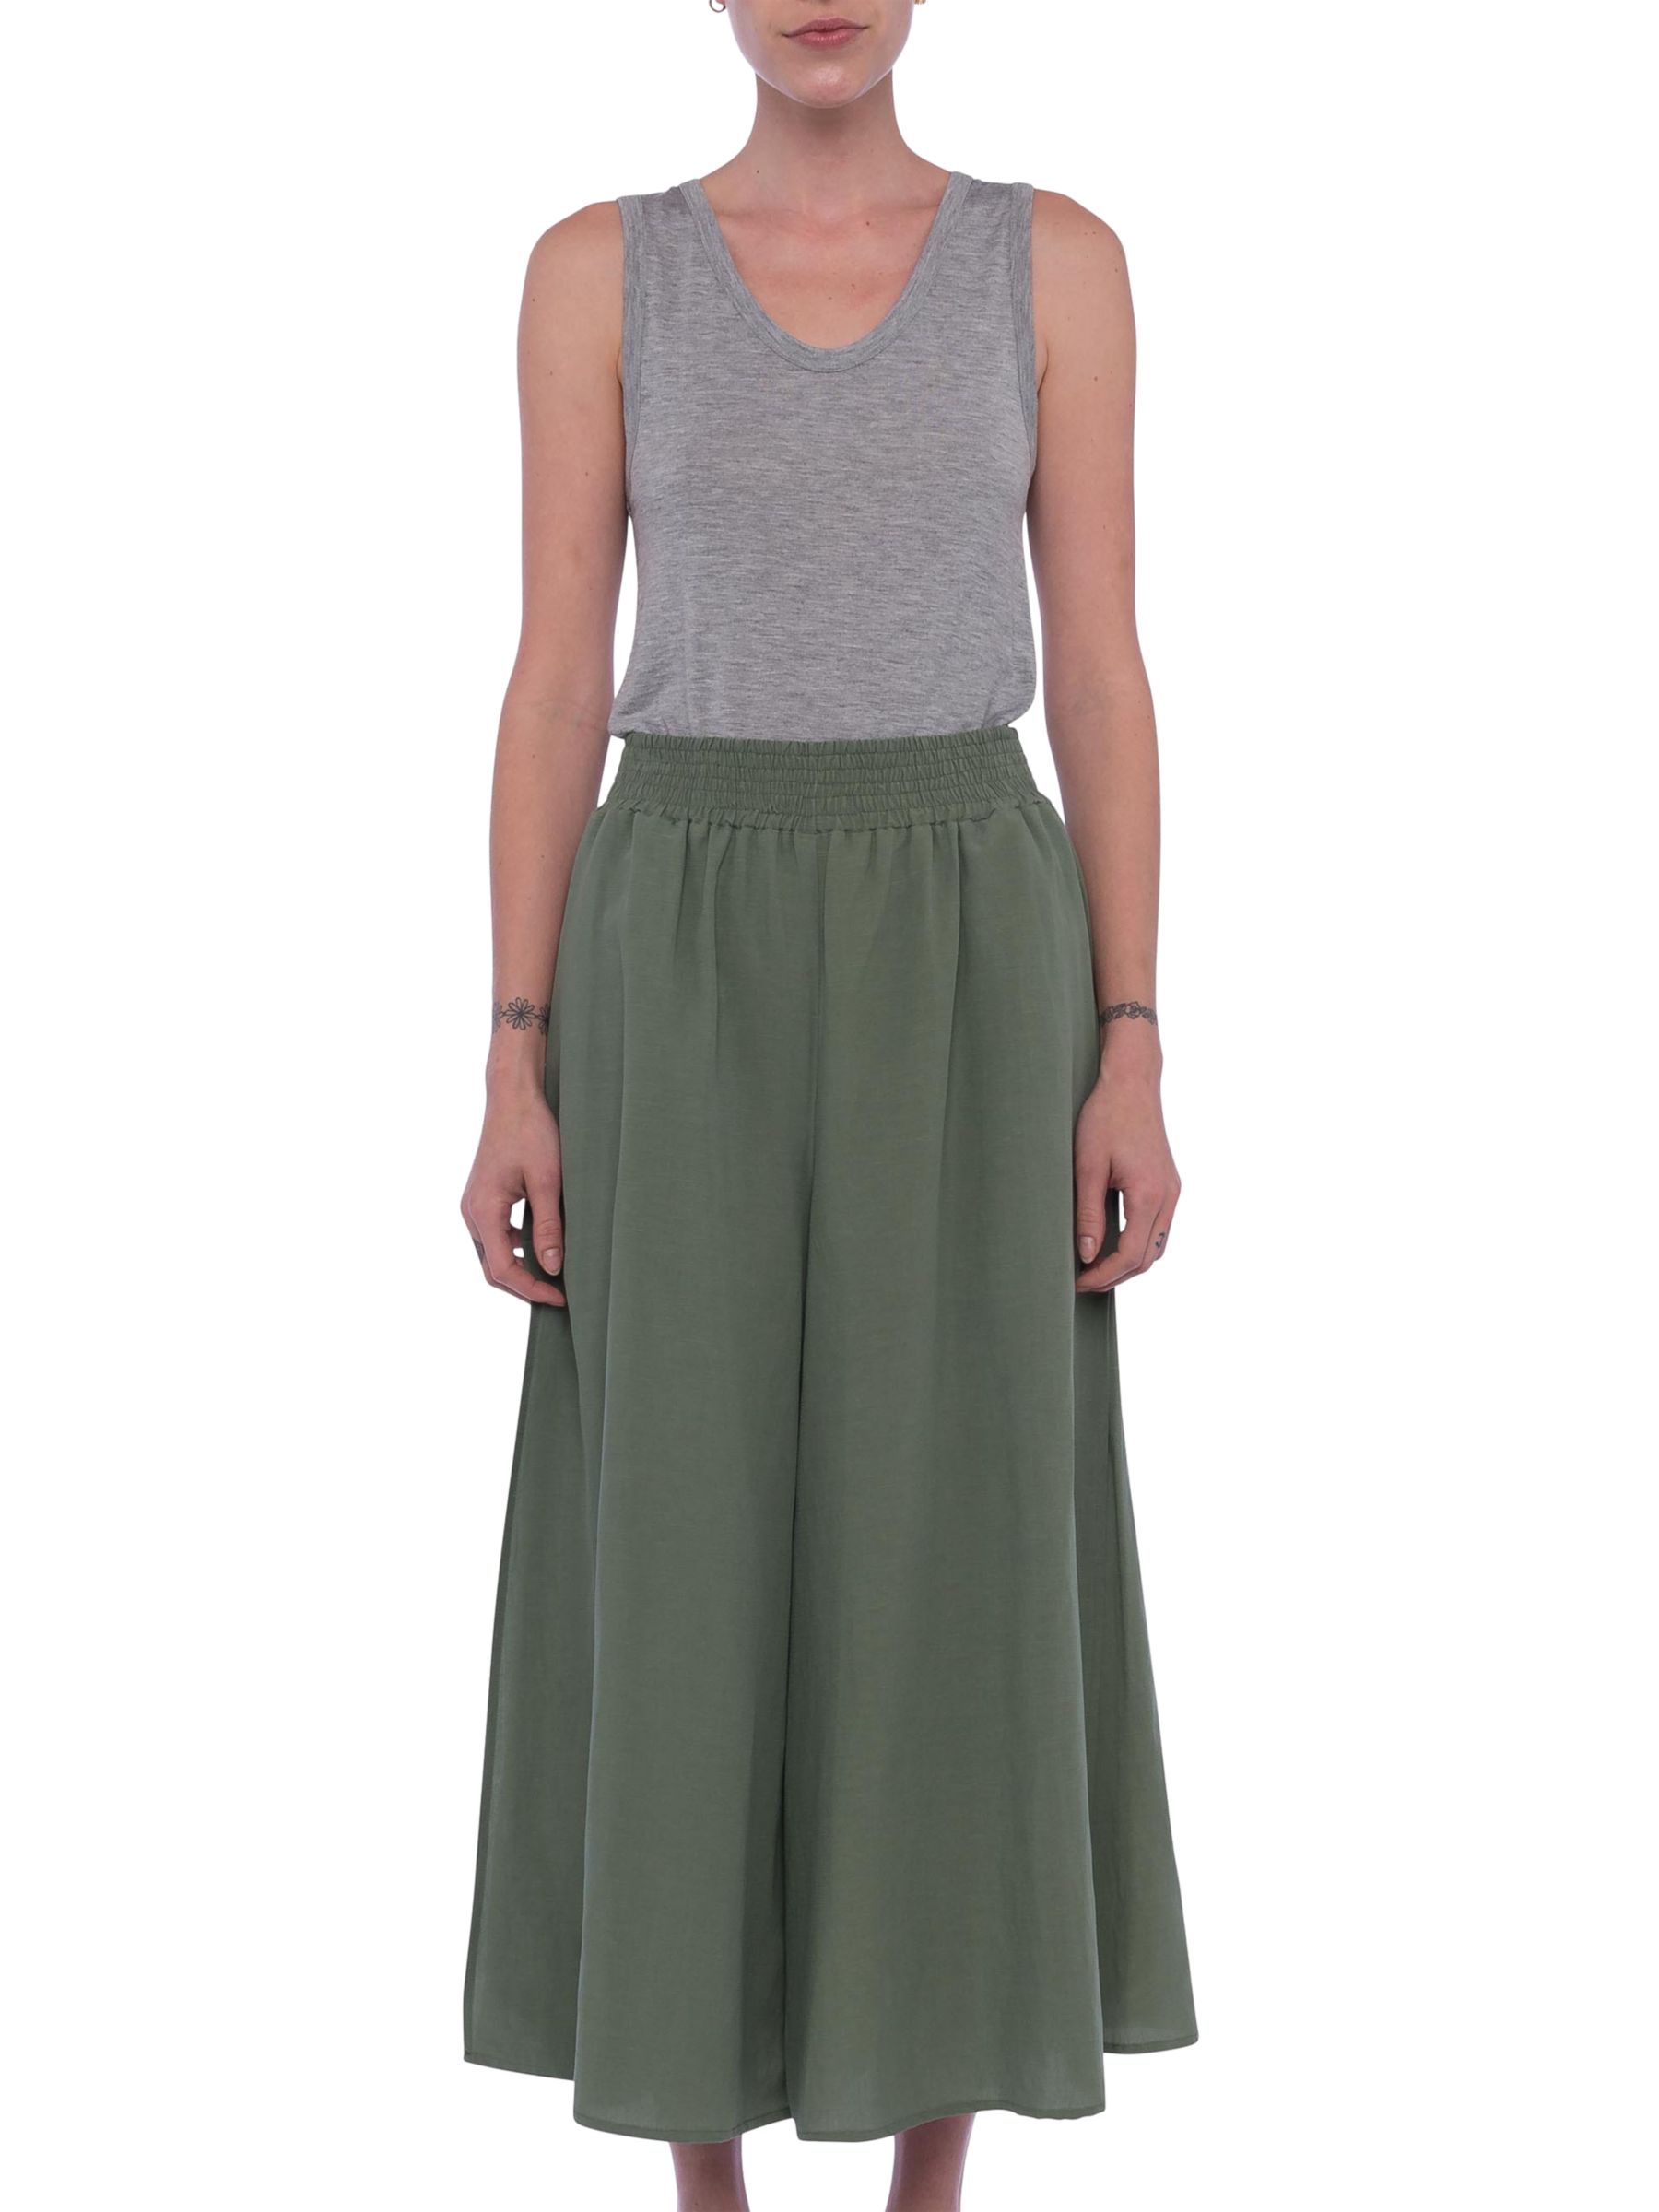 French Connection Ellesmer Culottes, Shadow Meadow